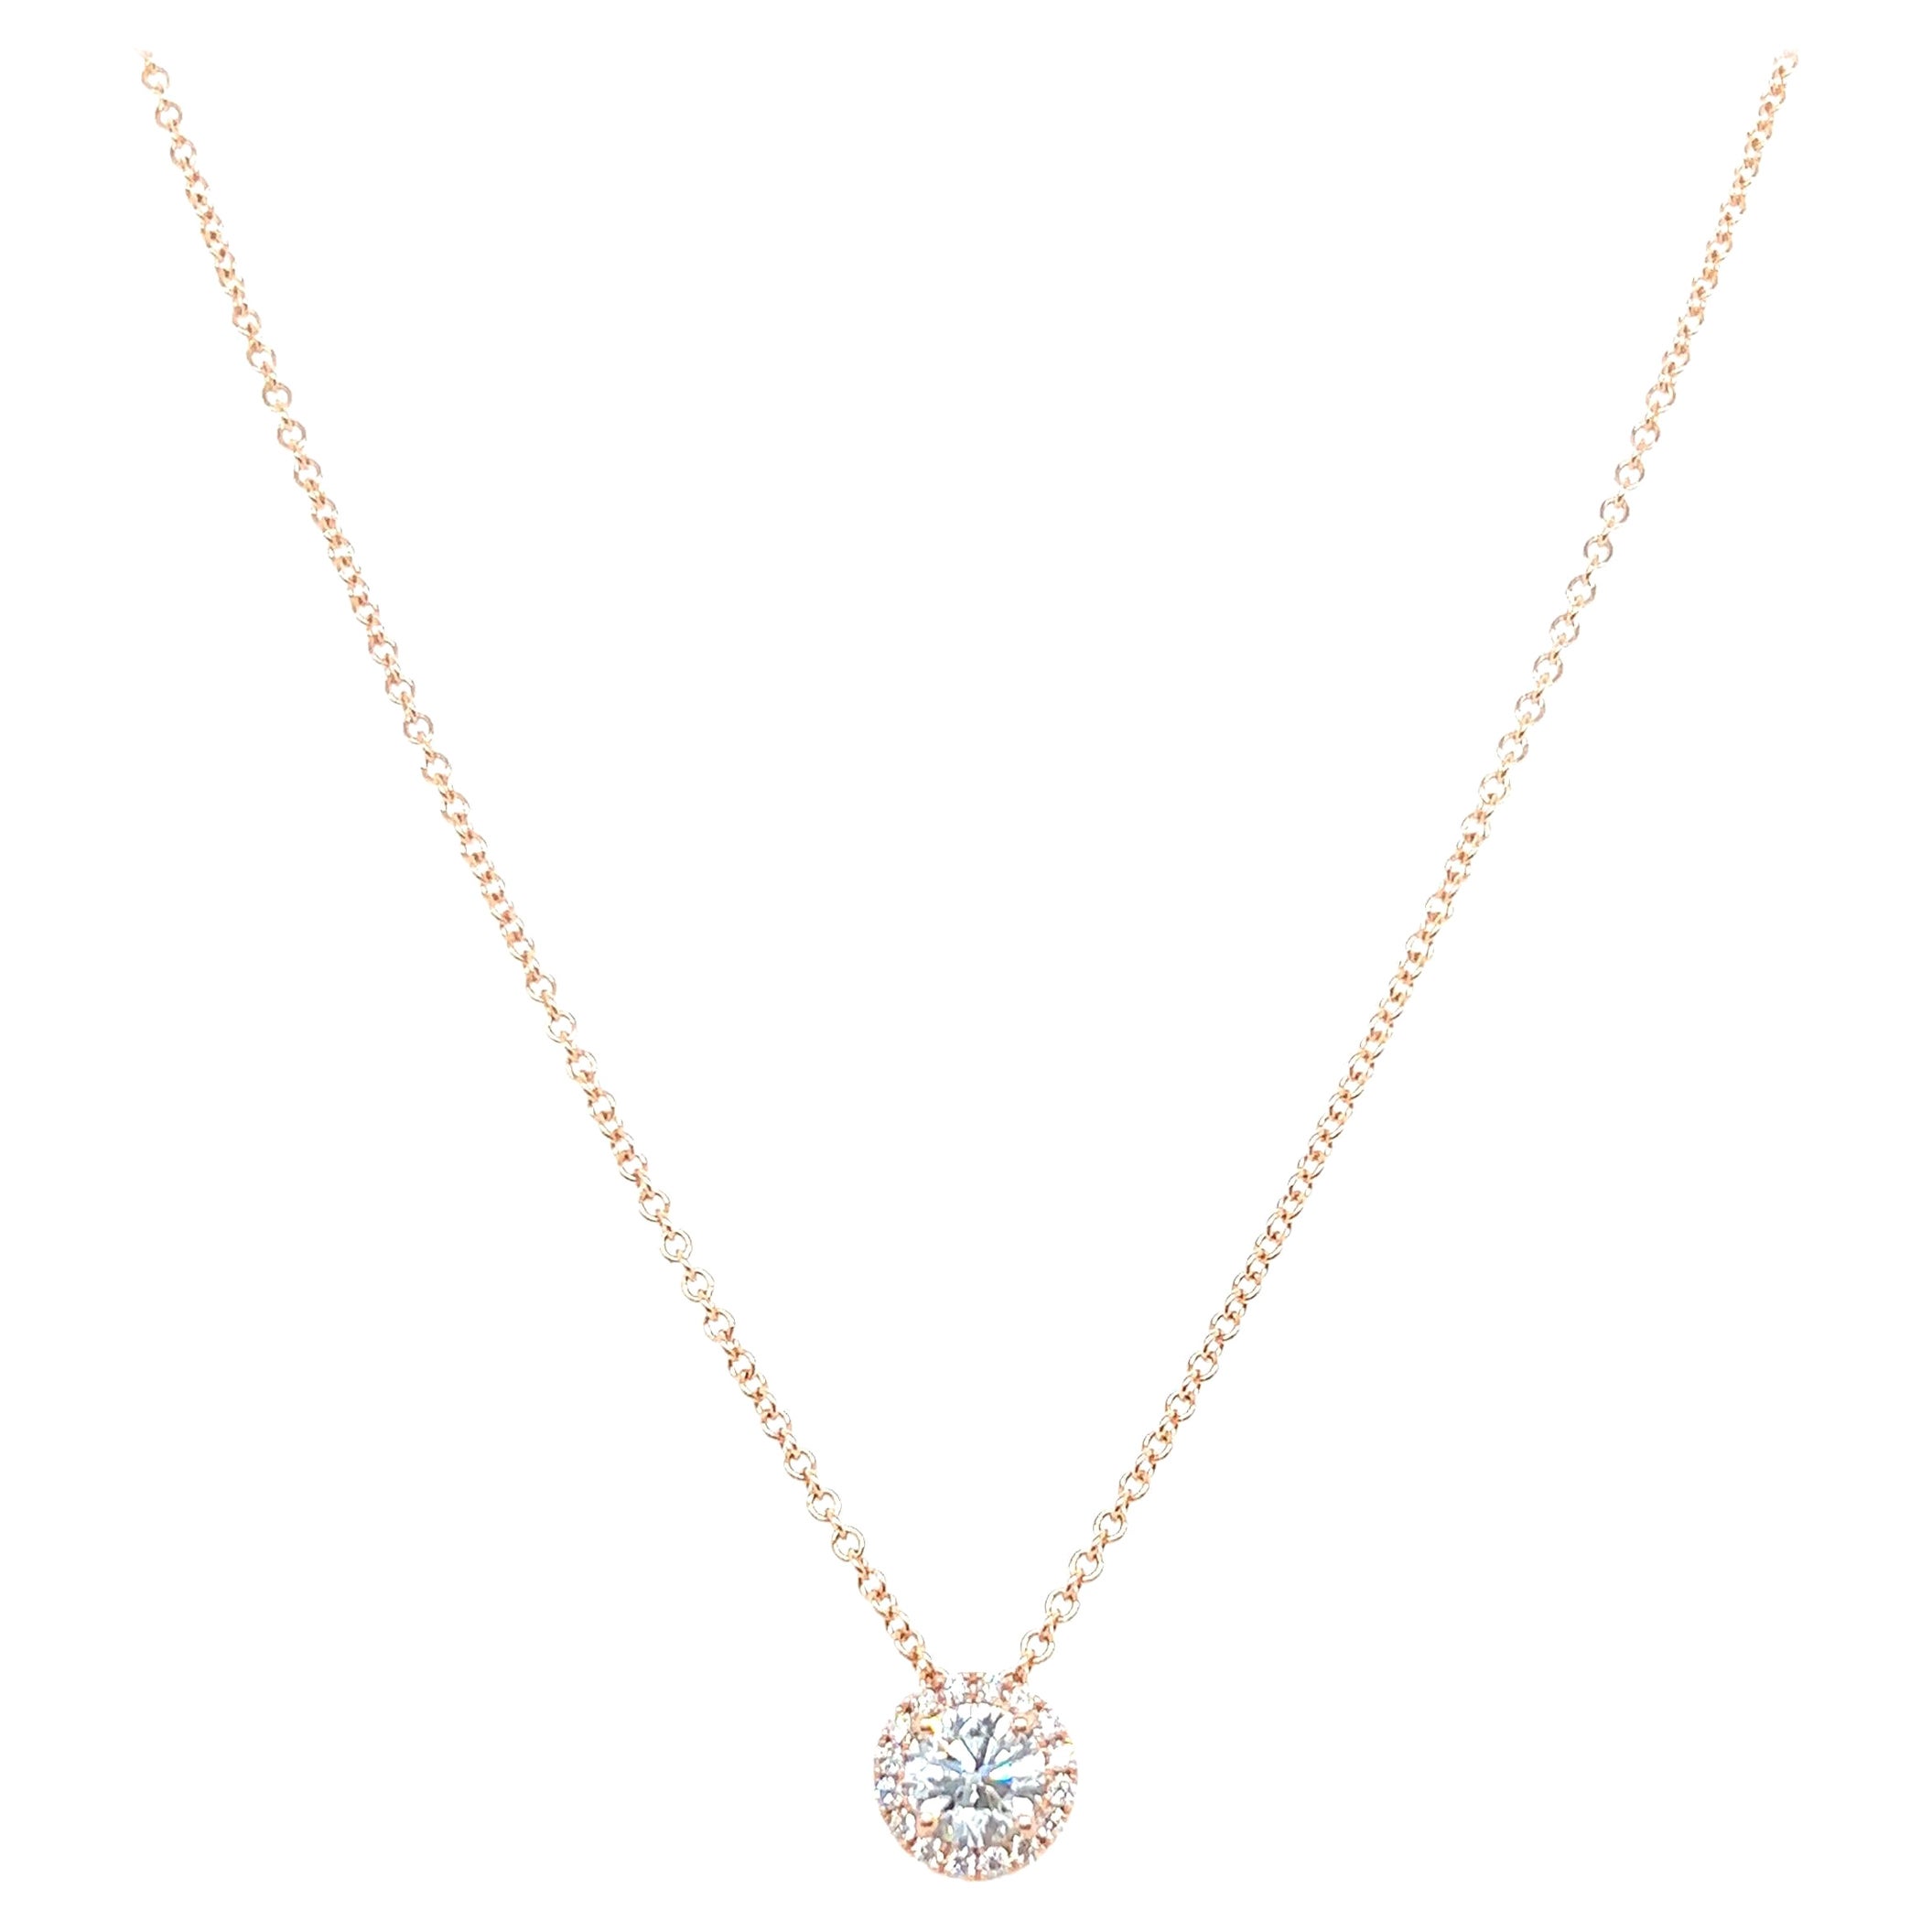 20 Inch 14k Yellow Gold 0.90 Carat Round Cut Diamond Solitaire Pendant Necklace